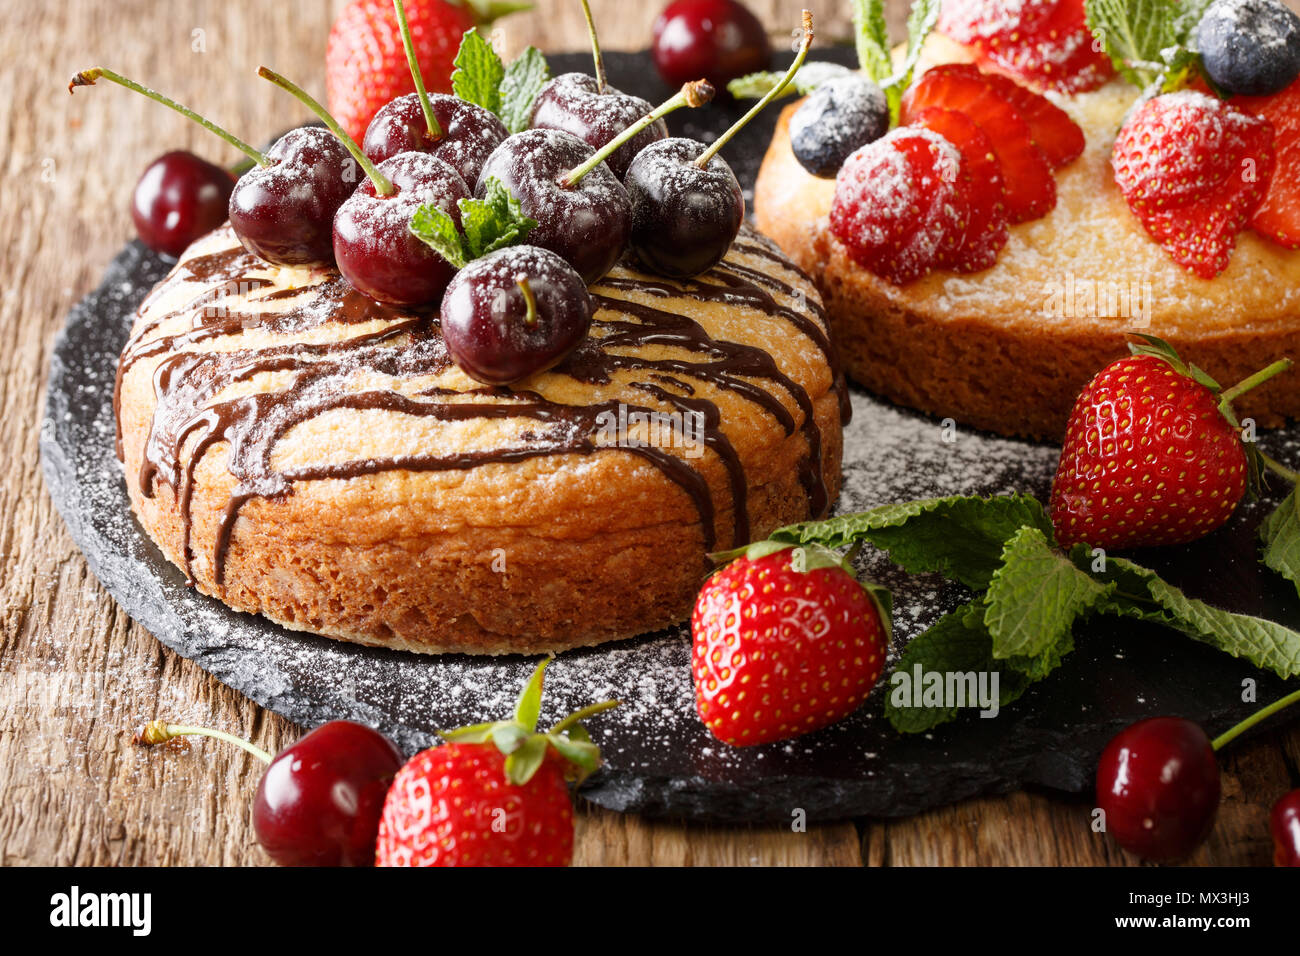 Dessert cakes with chocolate, mint, strawberries, cherries and blueberries close-up on the table. horizontal Stock Photo